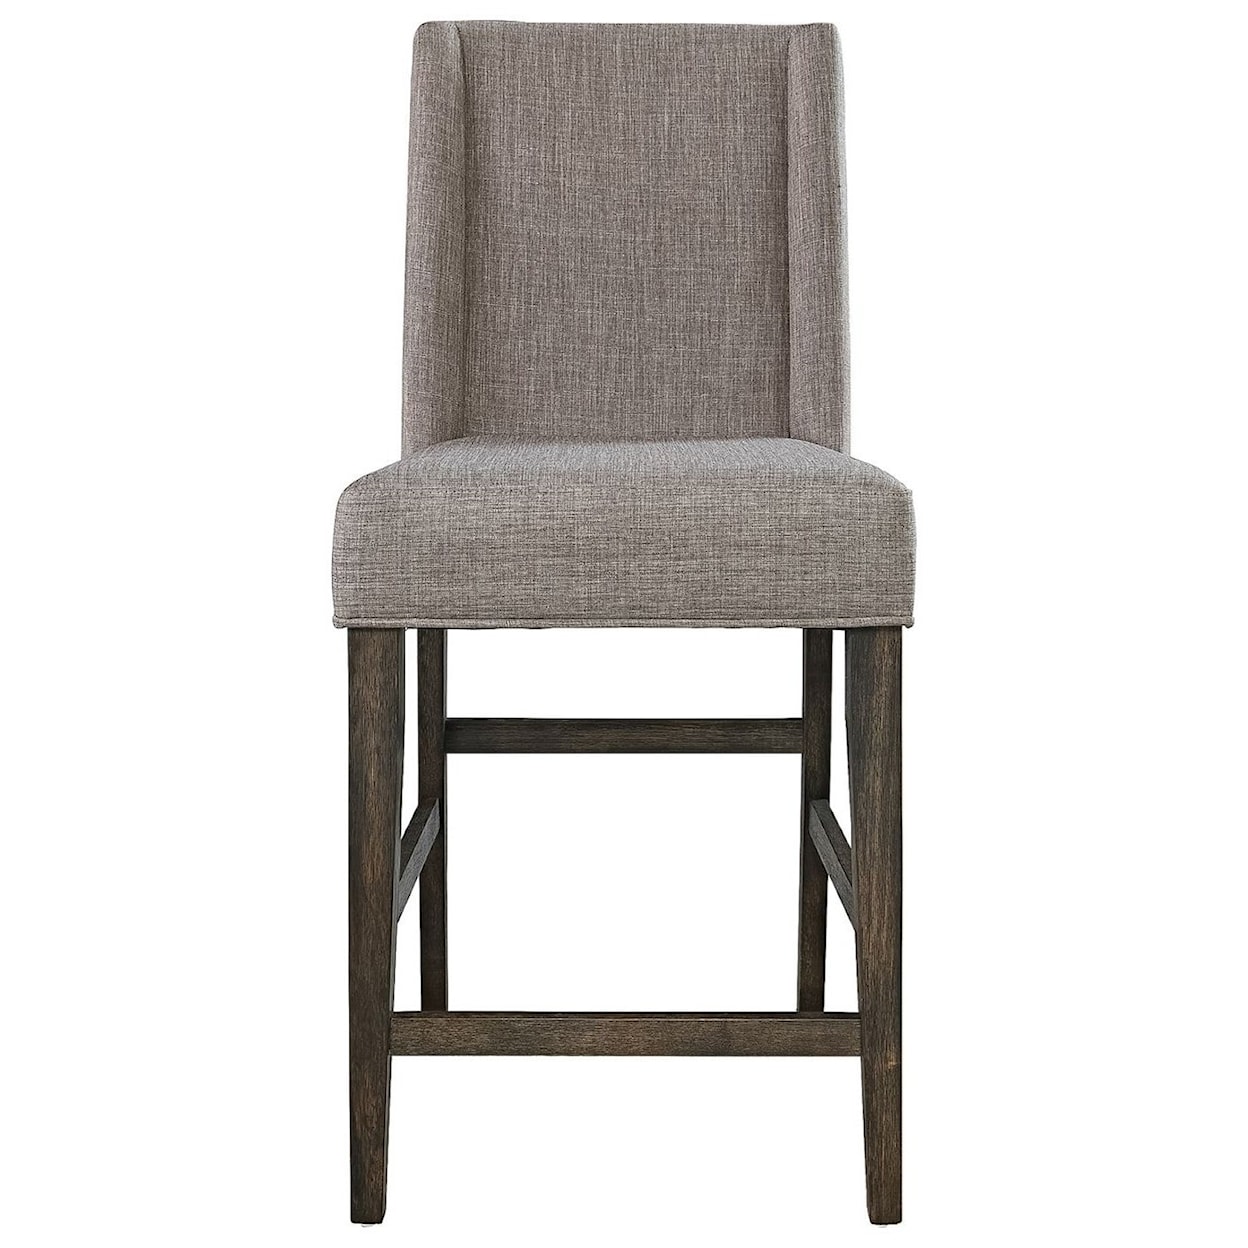 Libby Double Bridge Upholstered Counter-Height Dining Chair